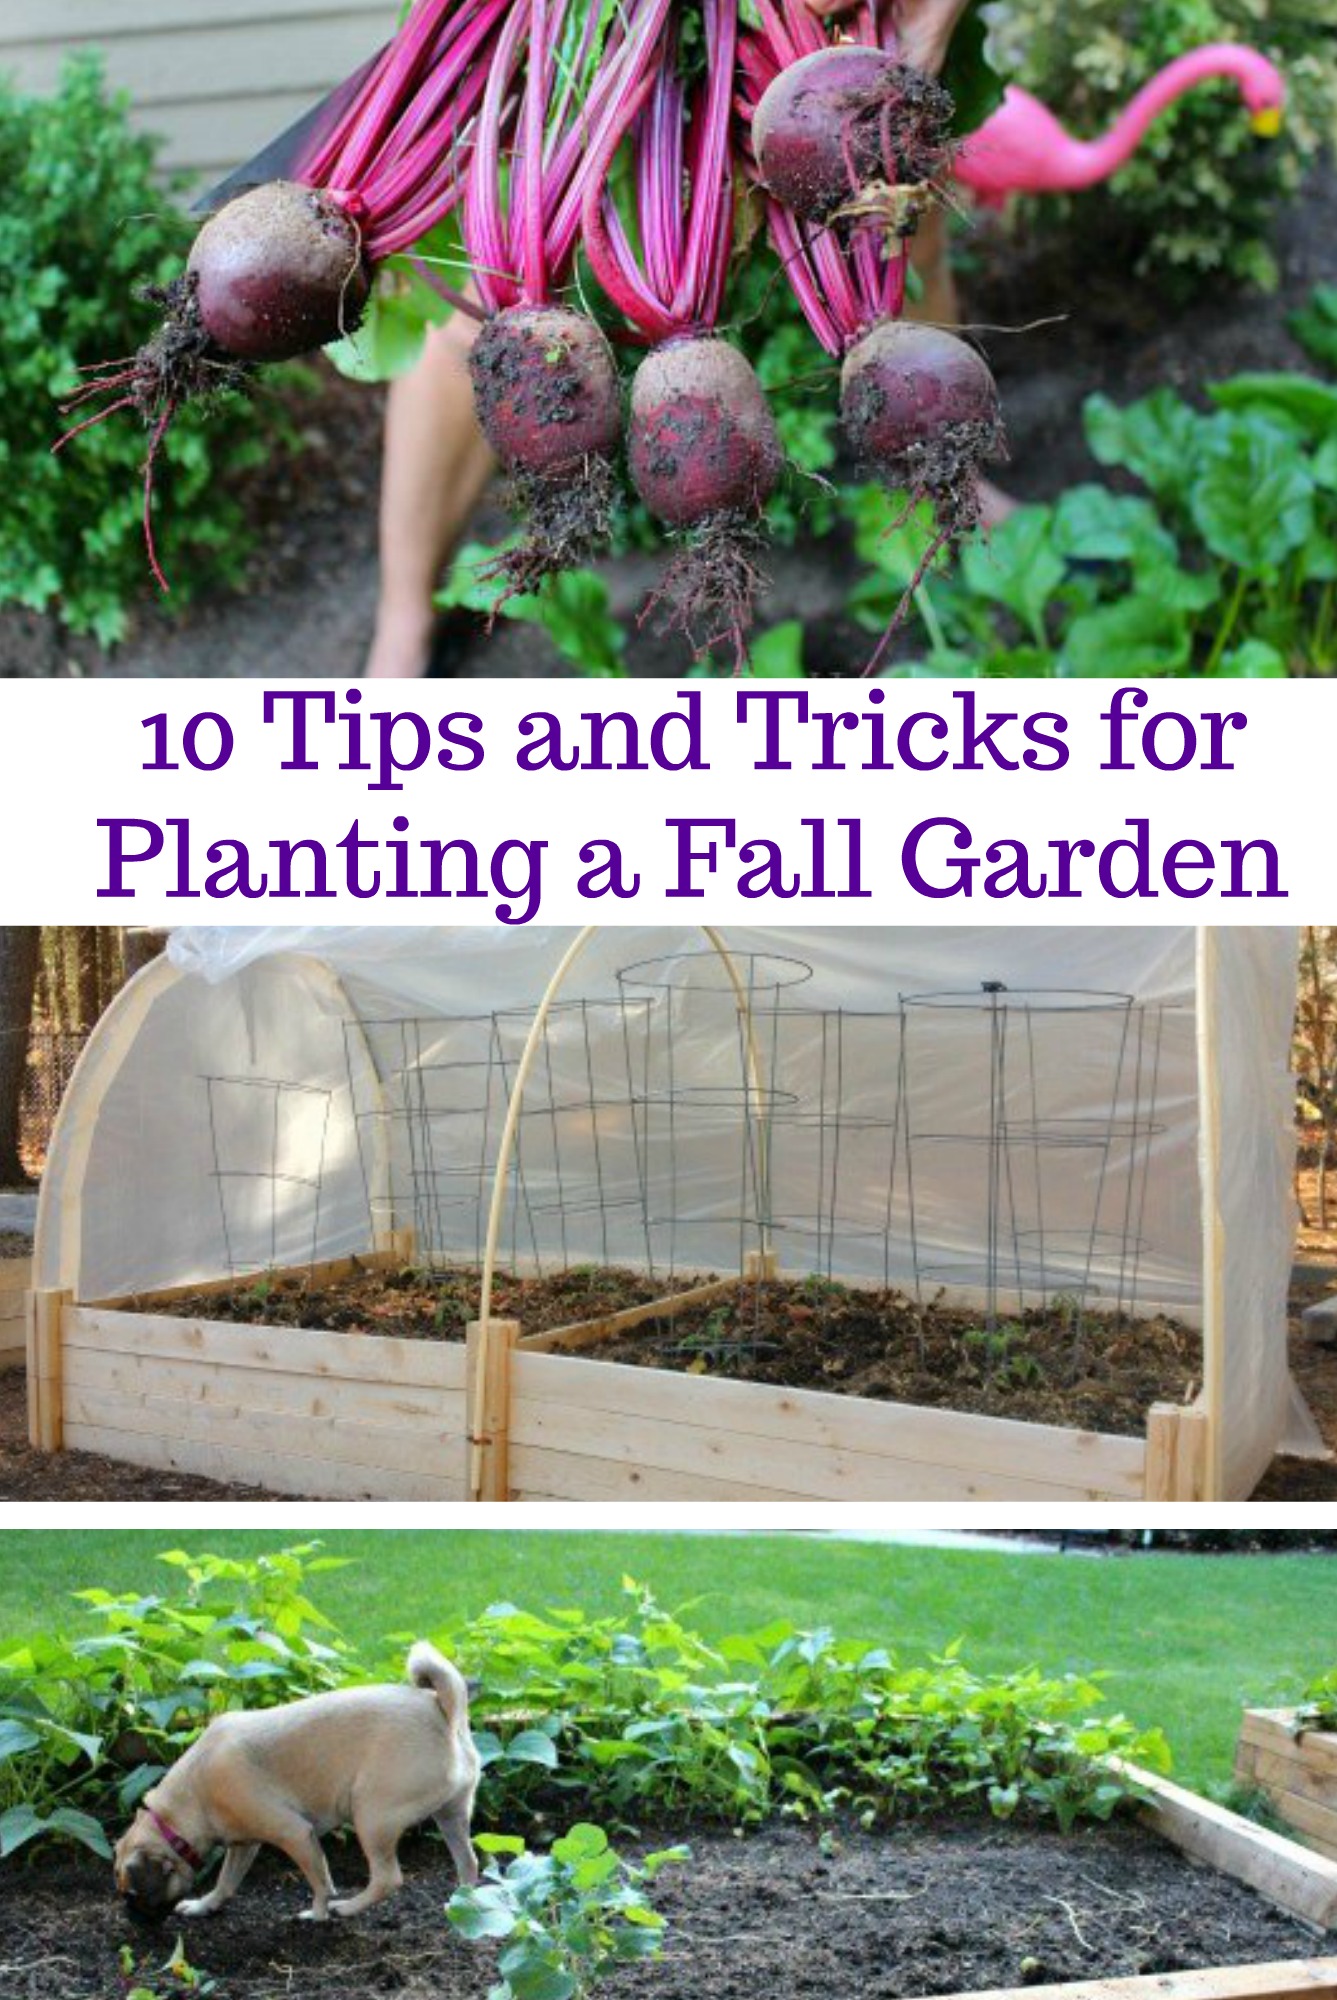 10 Tips and Tricks for Planting a Fall Garden